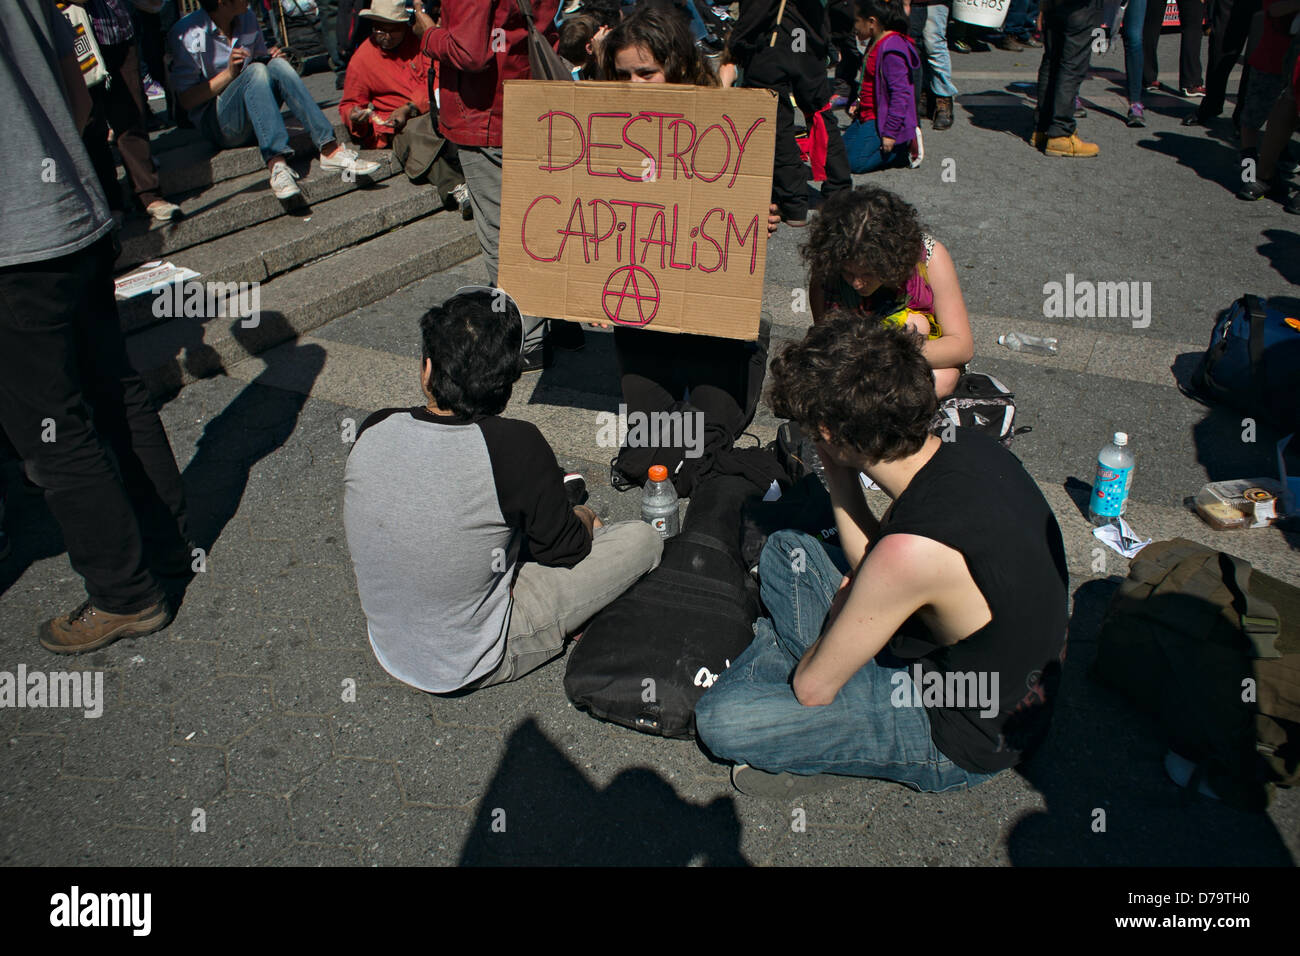 Wednesday, May 1, 2013, New York, NY, US: A woman holds a sign reading 'Destroy capitalism' as protesters gather in New York's Union Square to mark  International Workers' Day, also known as May Day. Stock Photo